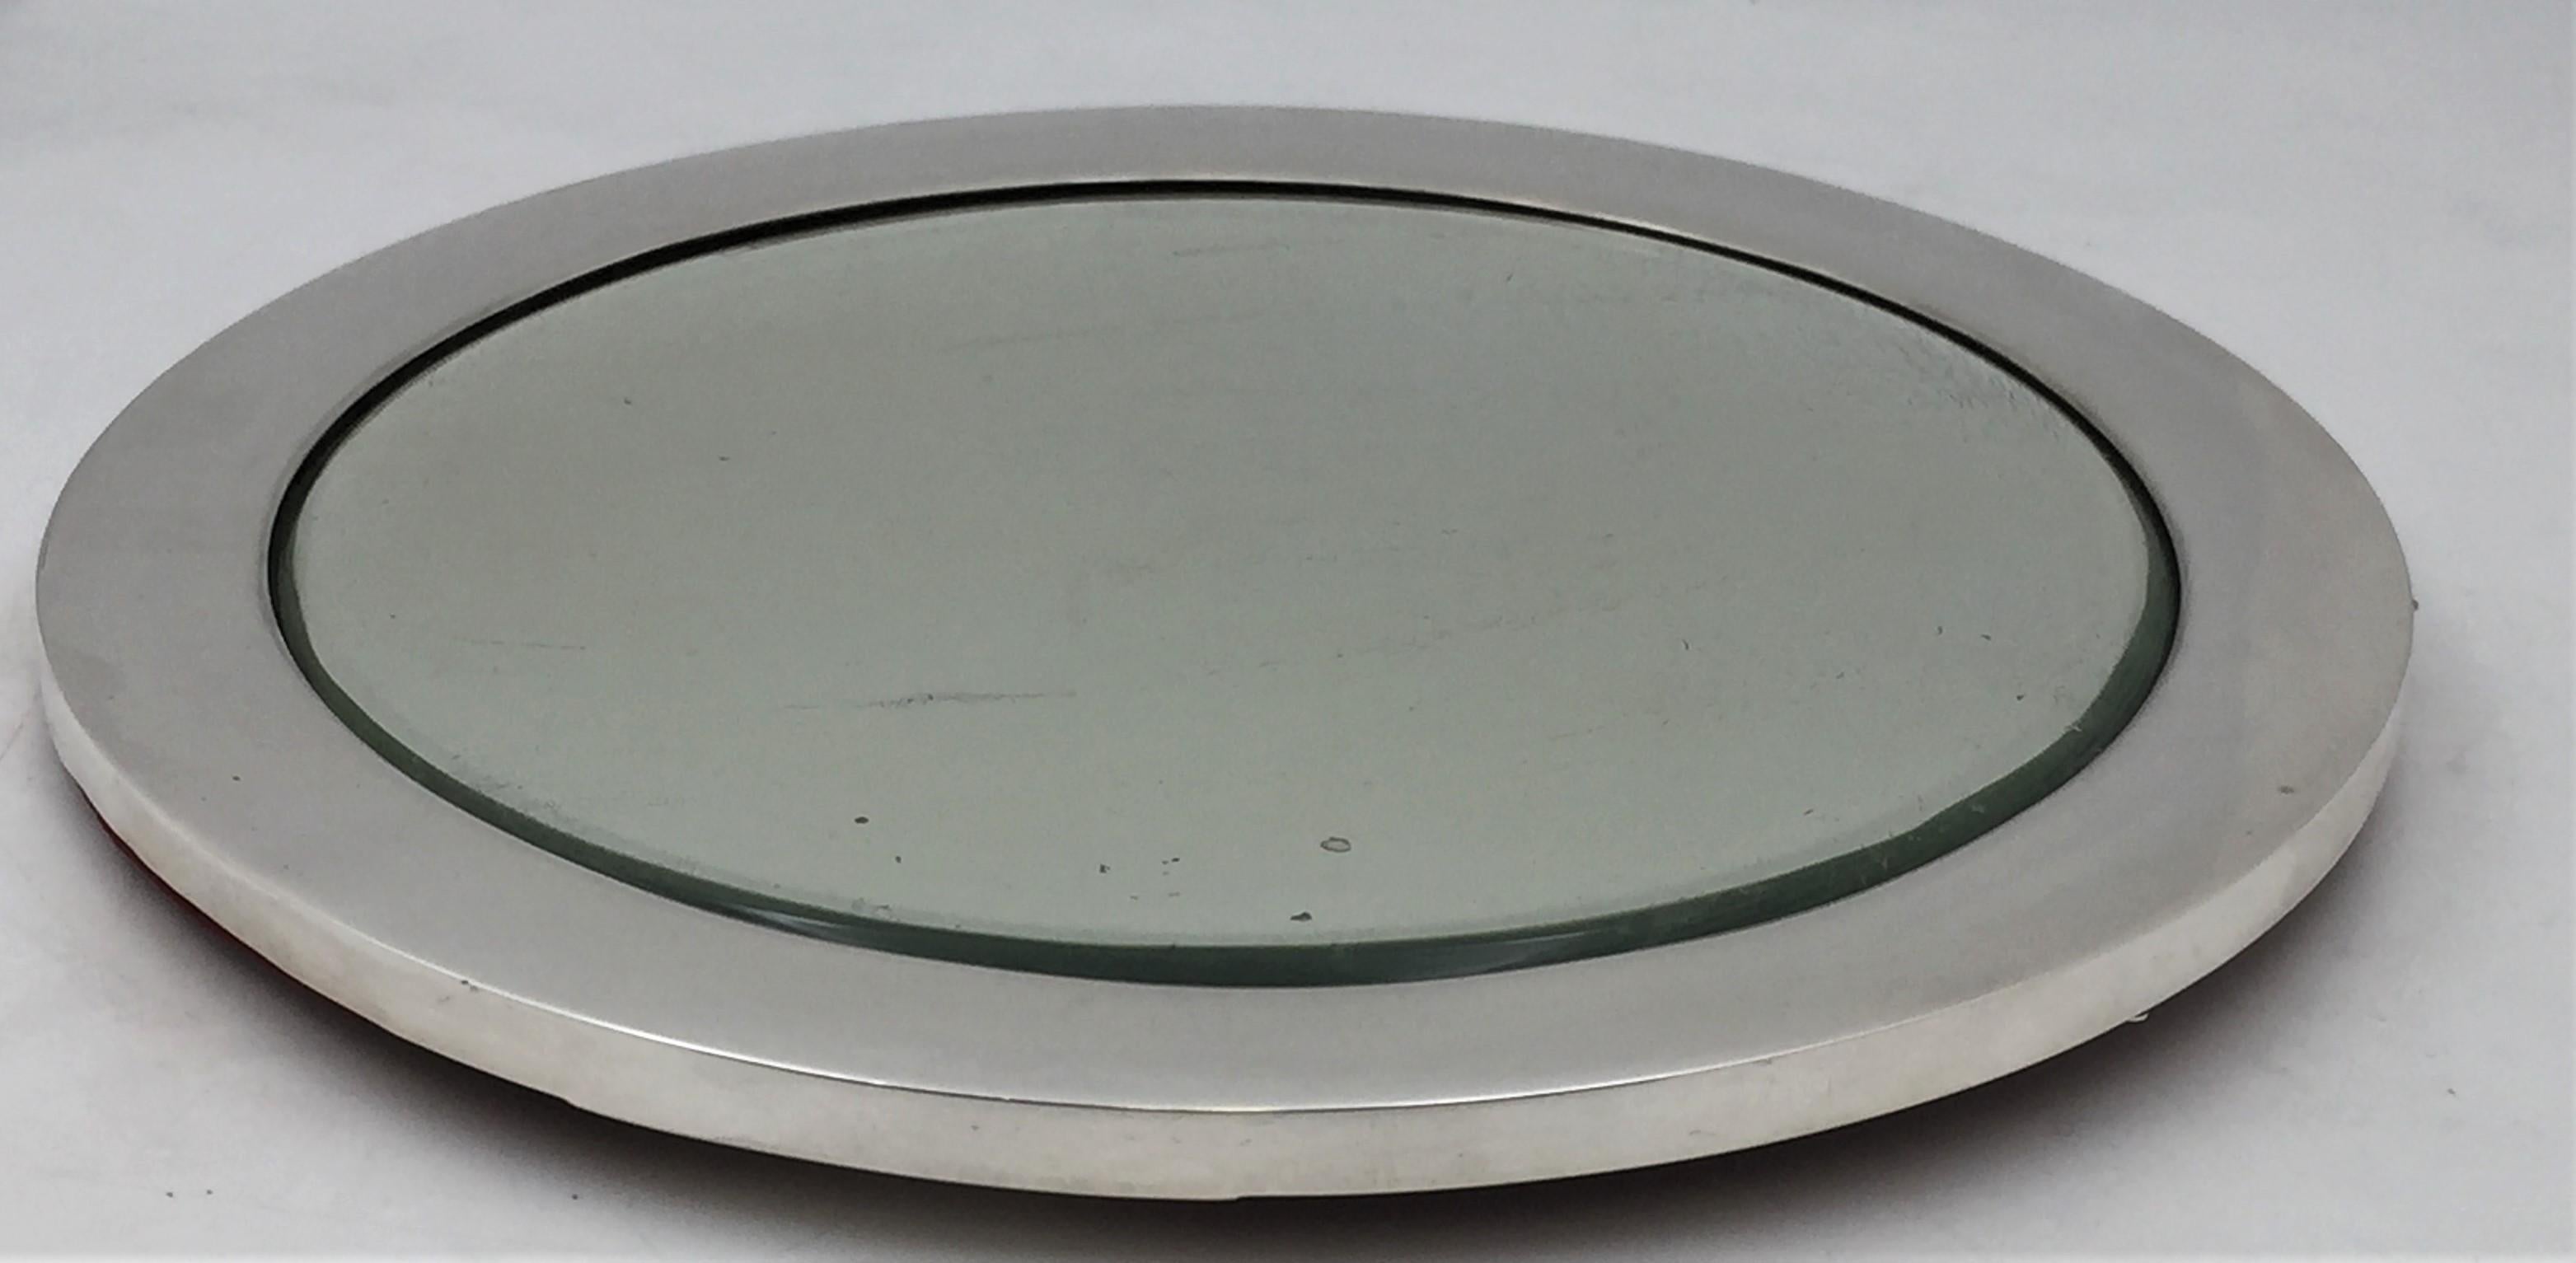 American Tiffany & Co. 1909 Sterling Silver Mirrored Platter in Art Deco Style For Sale